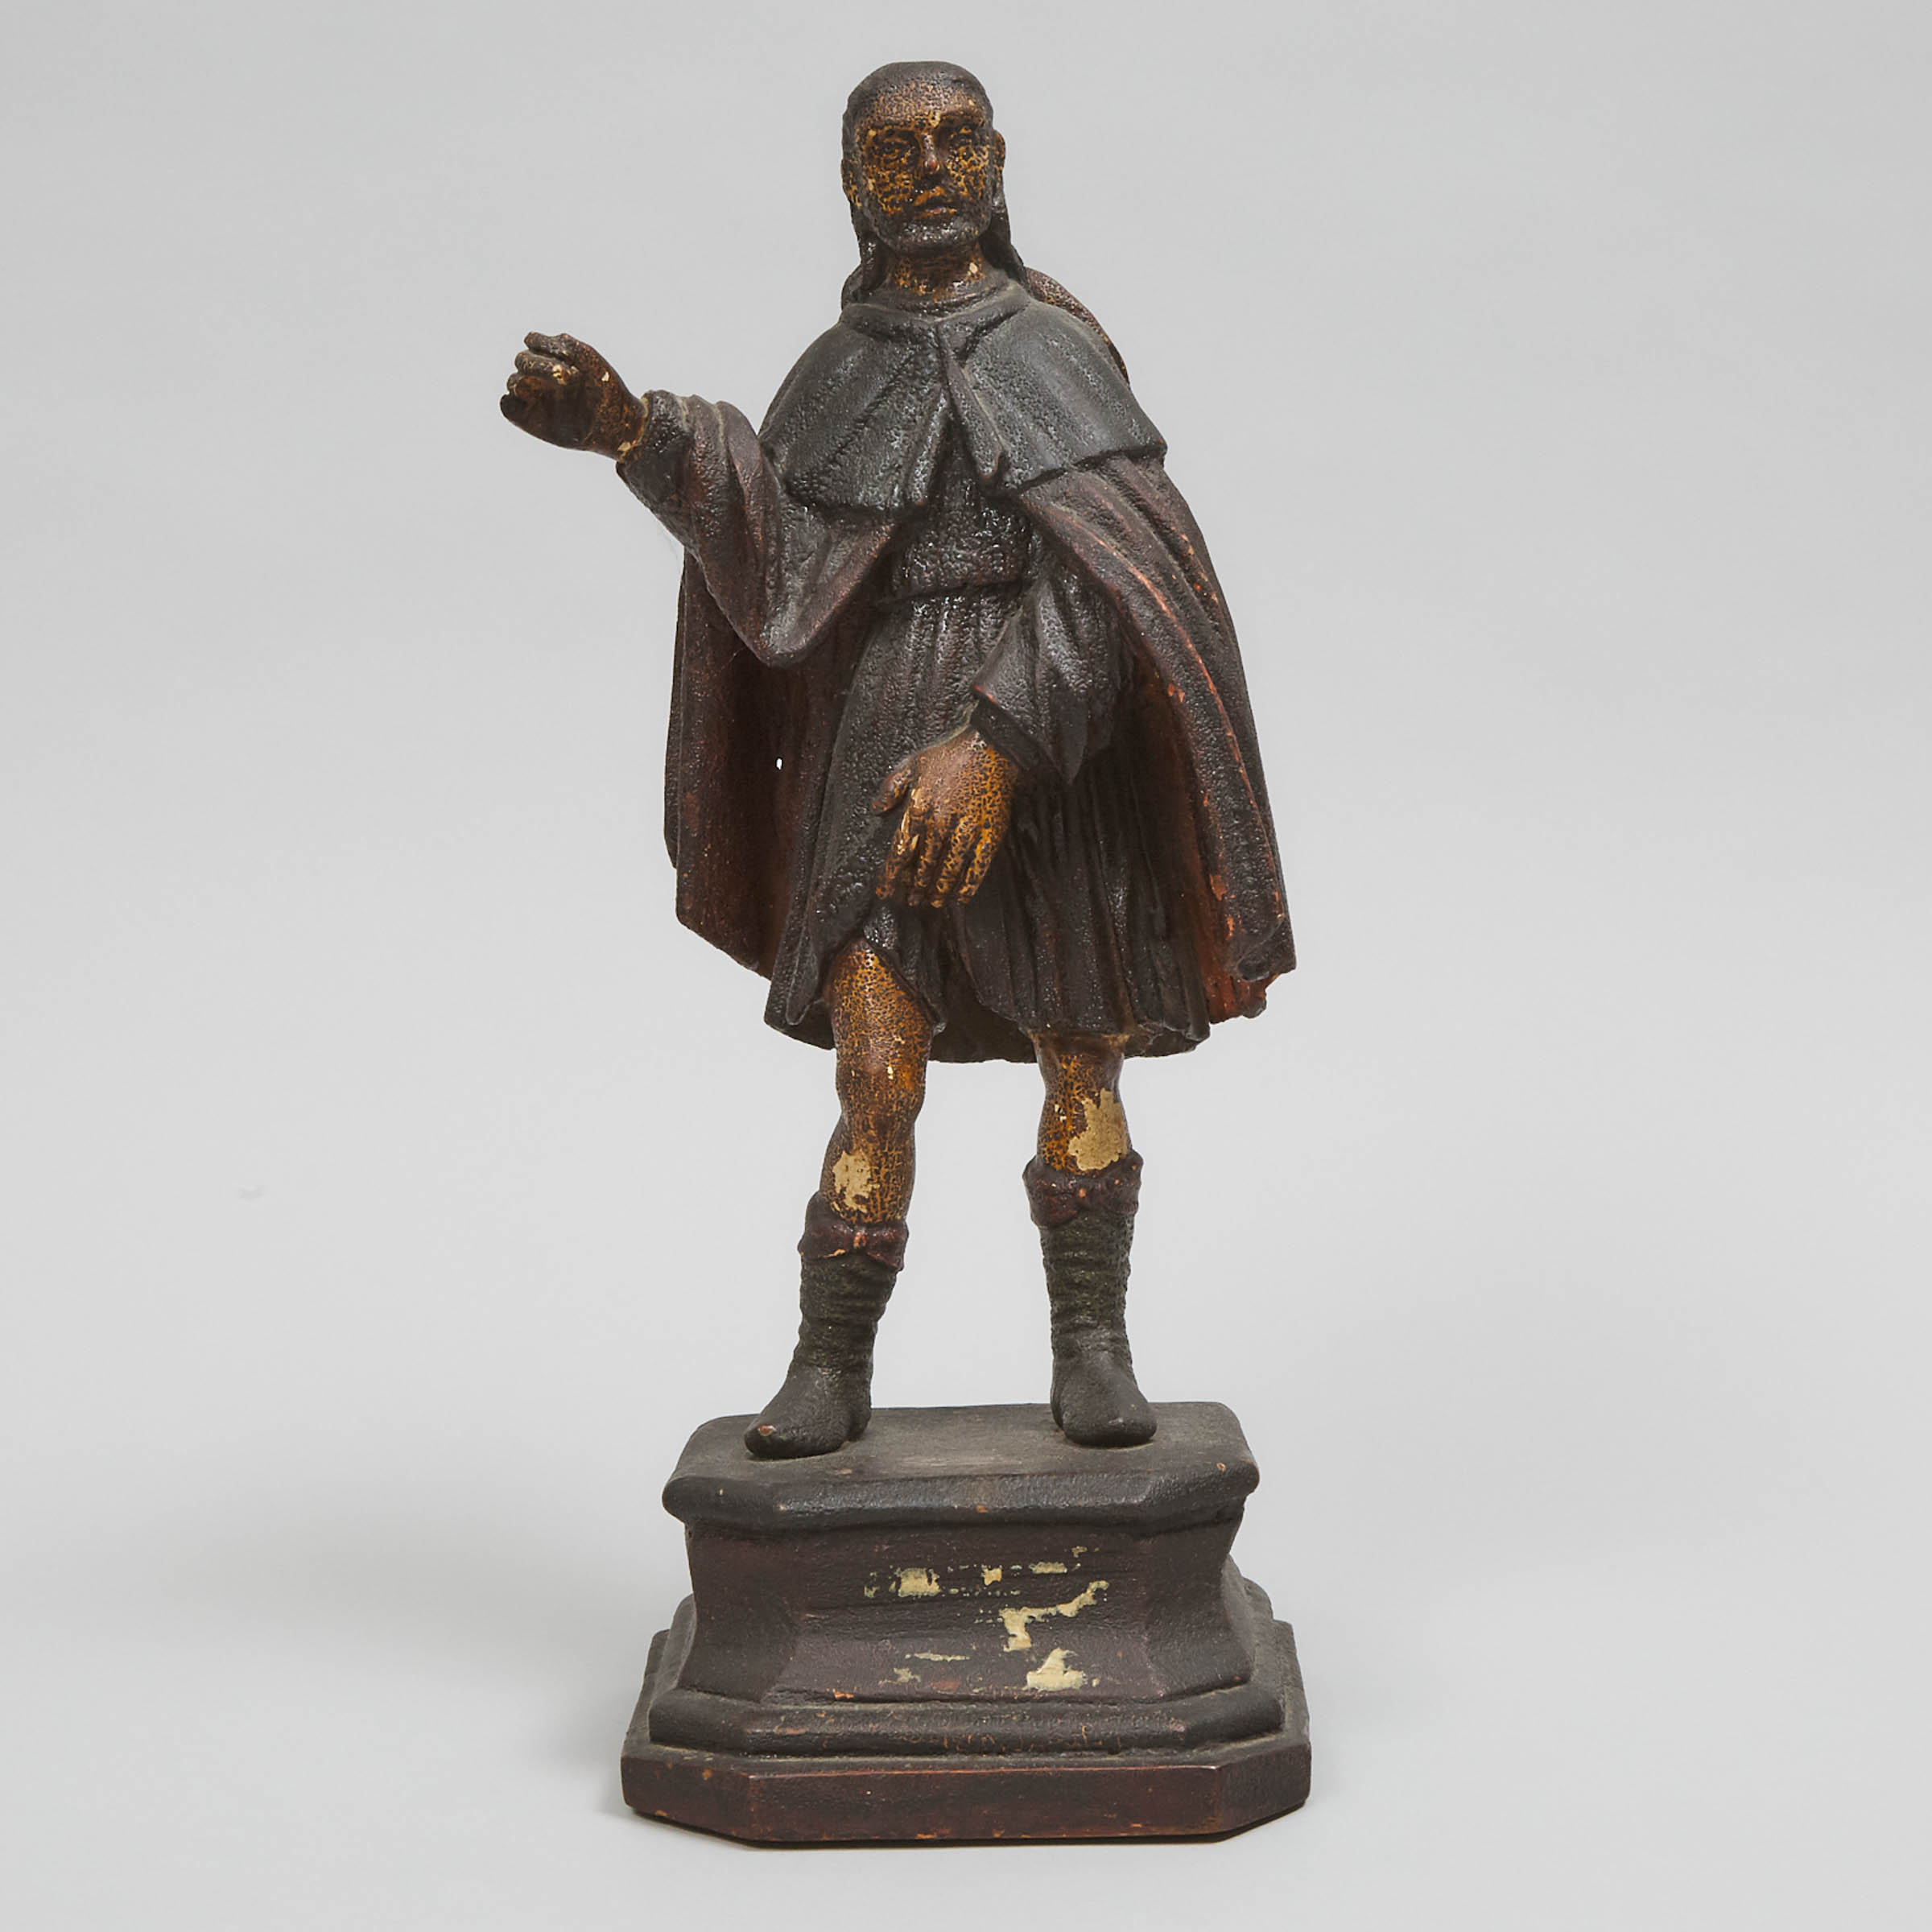 Spanish Colonial Carved and Polychromed Figure of St. Roch, 18th century or earlier